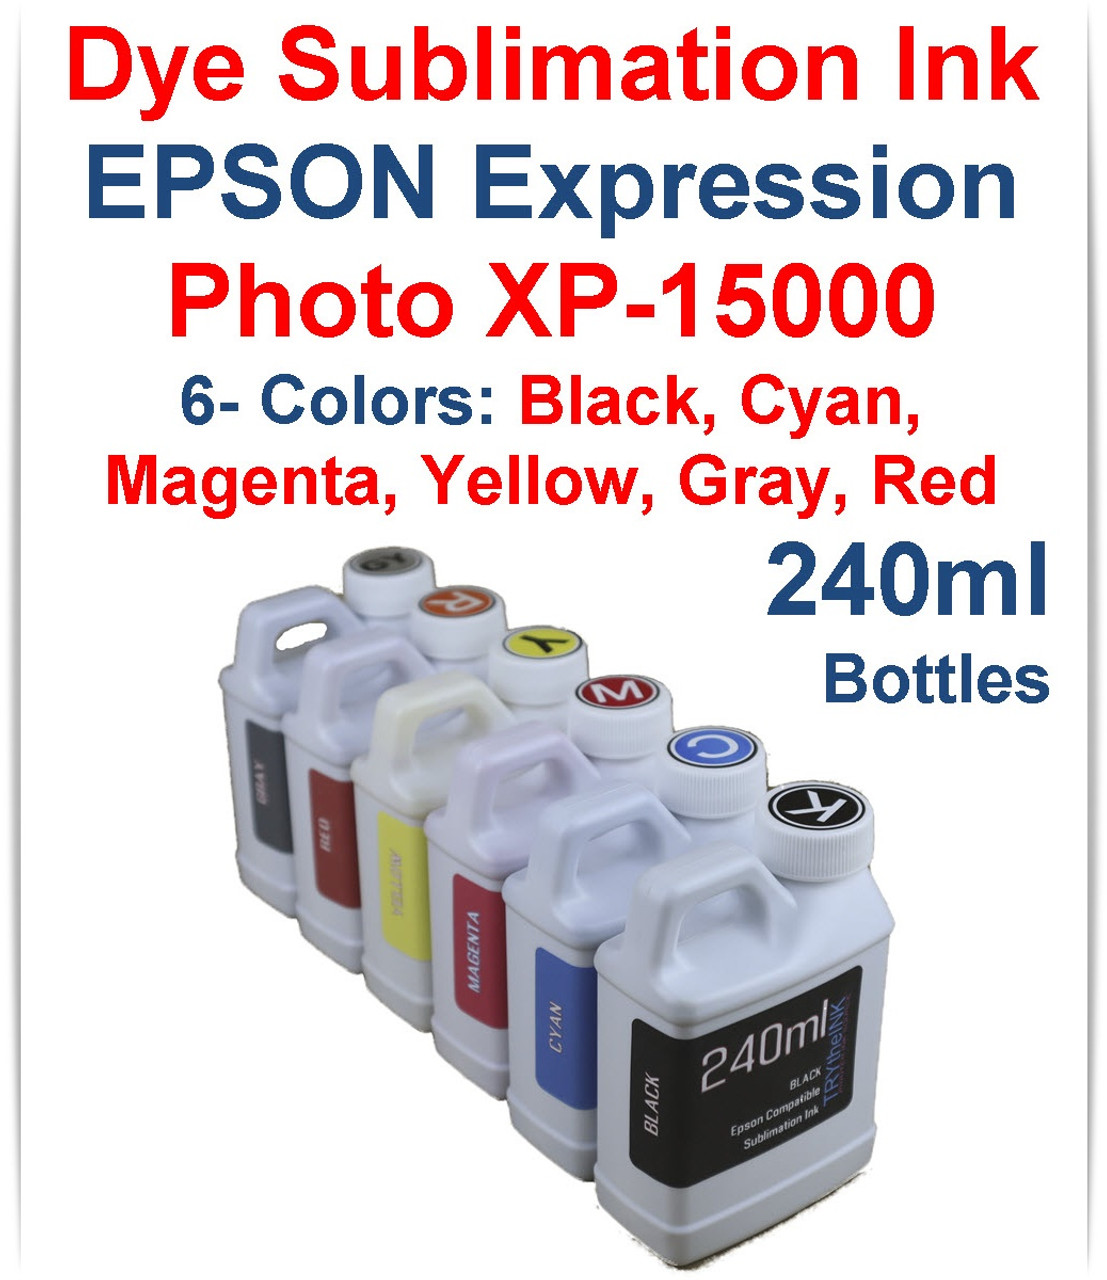 Dye Sublimation Ink 6- 240ml Bottles for Epson Expression Photo HD XP-15000 Printer